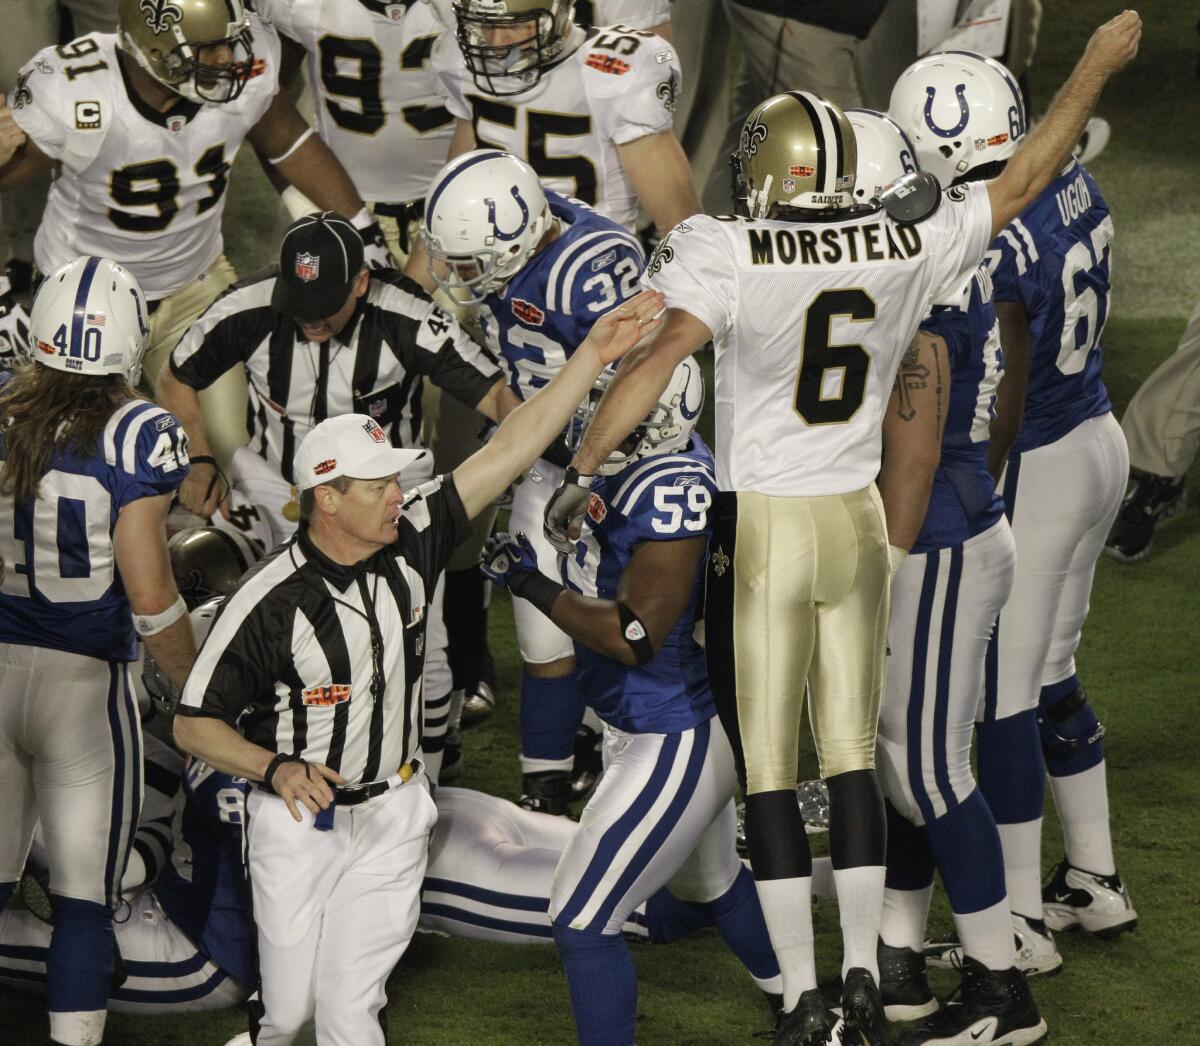 Saints punter Thomas Morstead reacts as an official signals New Orleans will have possession of the ball after an onside kick to open the second half of Super Bowl XLIV.